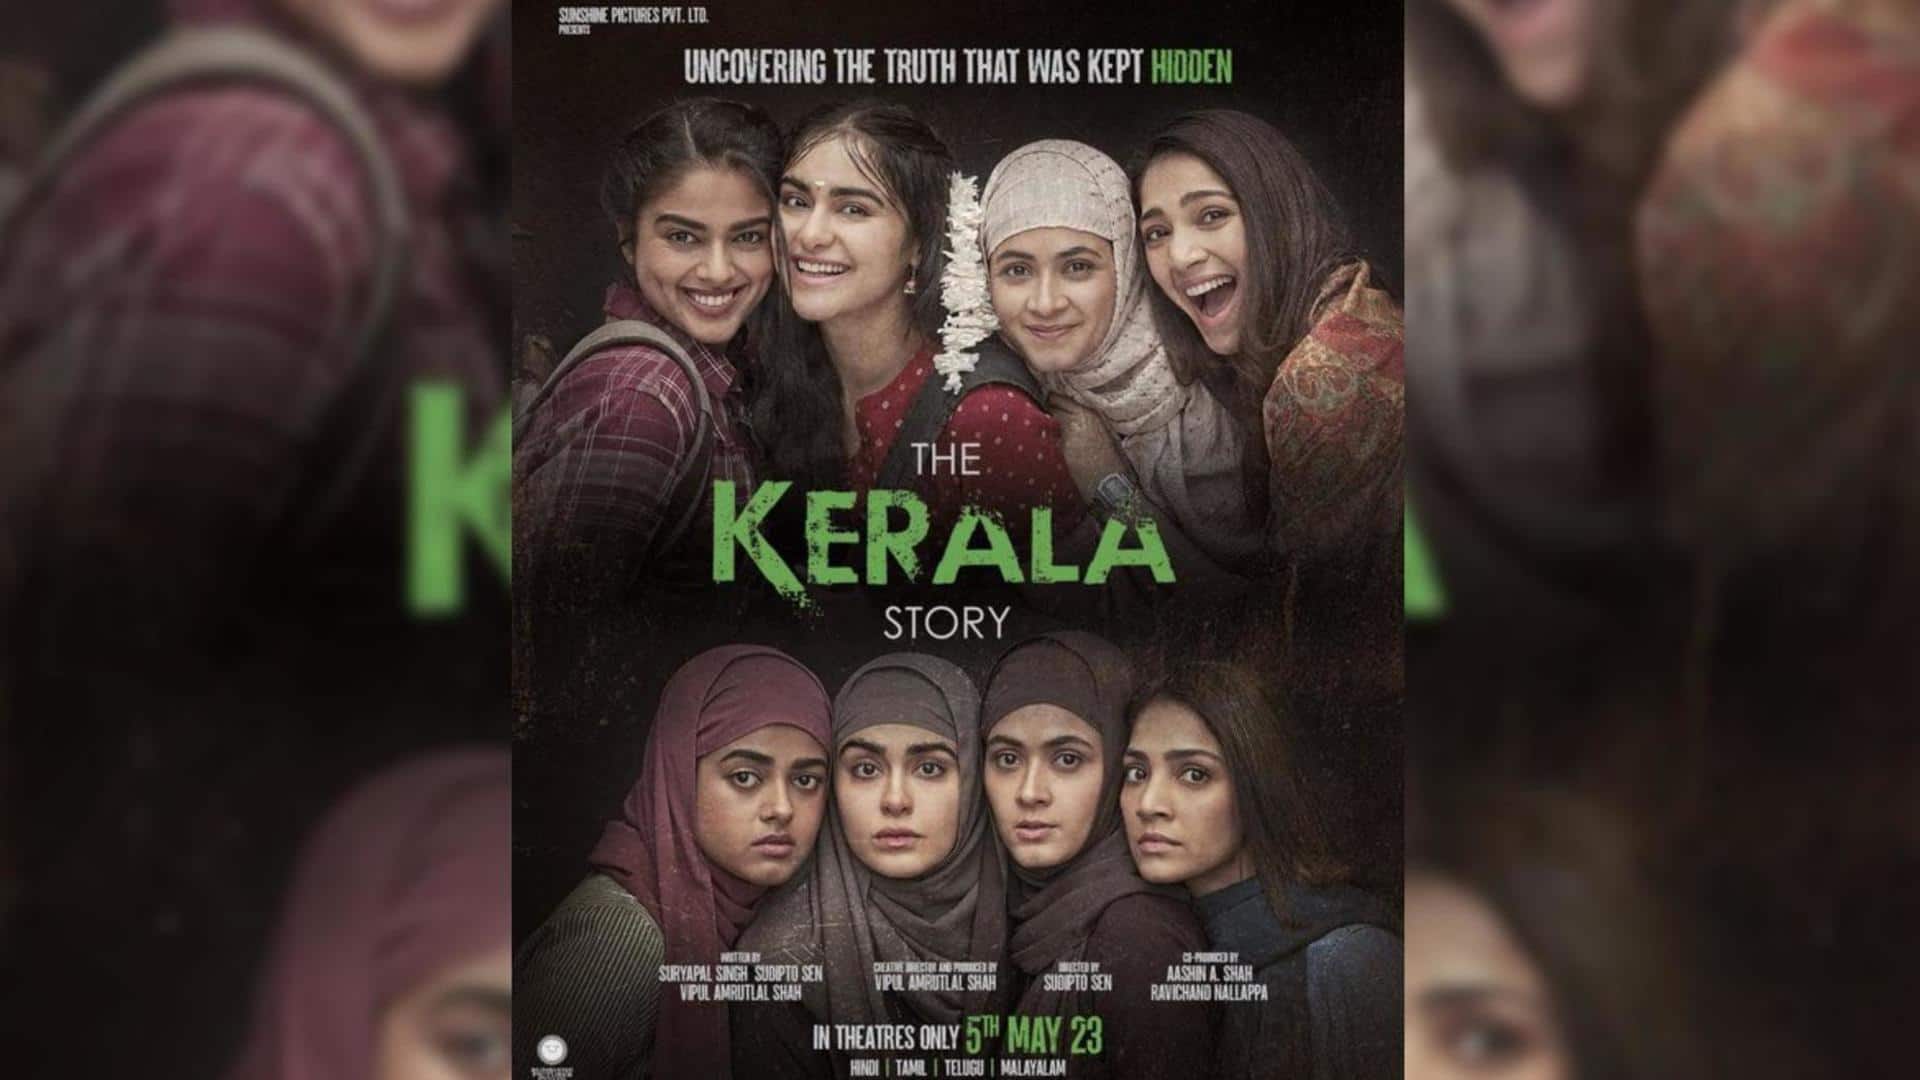 'The Kerala Story' OTT release: When, where to watch film